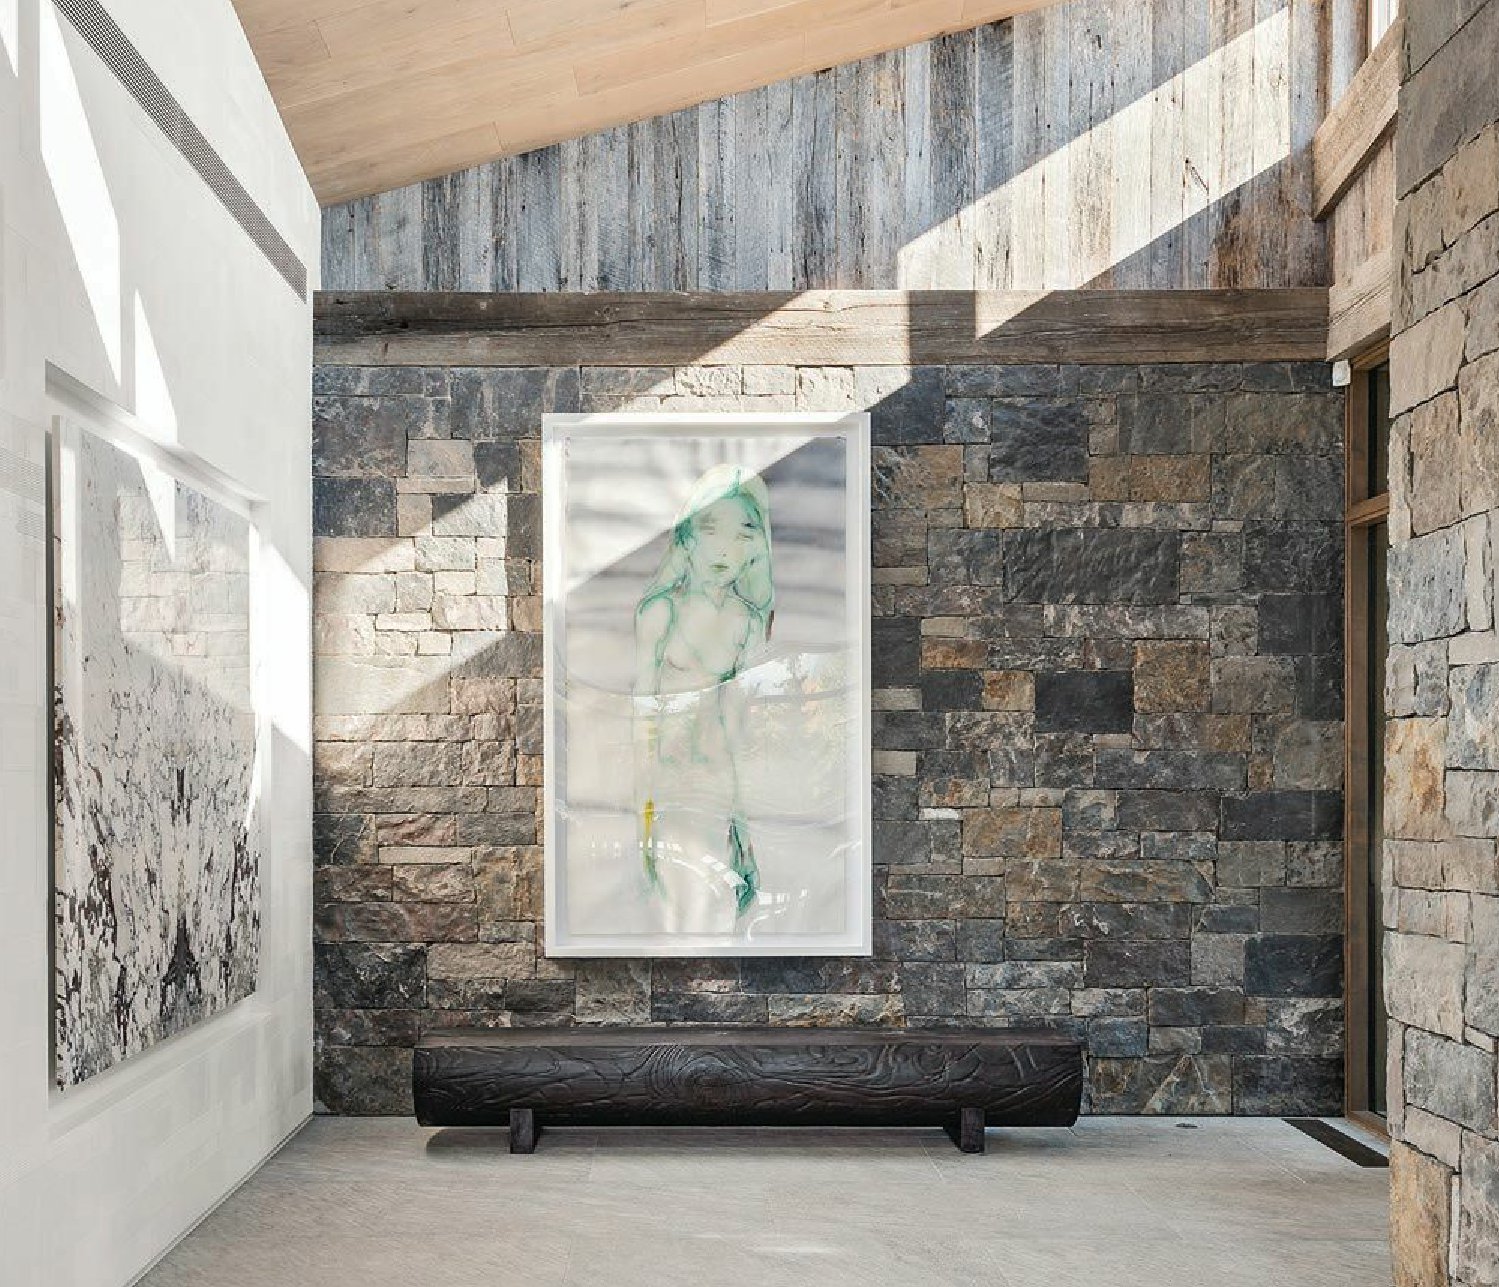 Stonework and artwork define the entry. Photographed by Michael Brands and Brooke Casillas